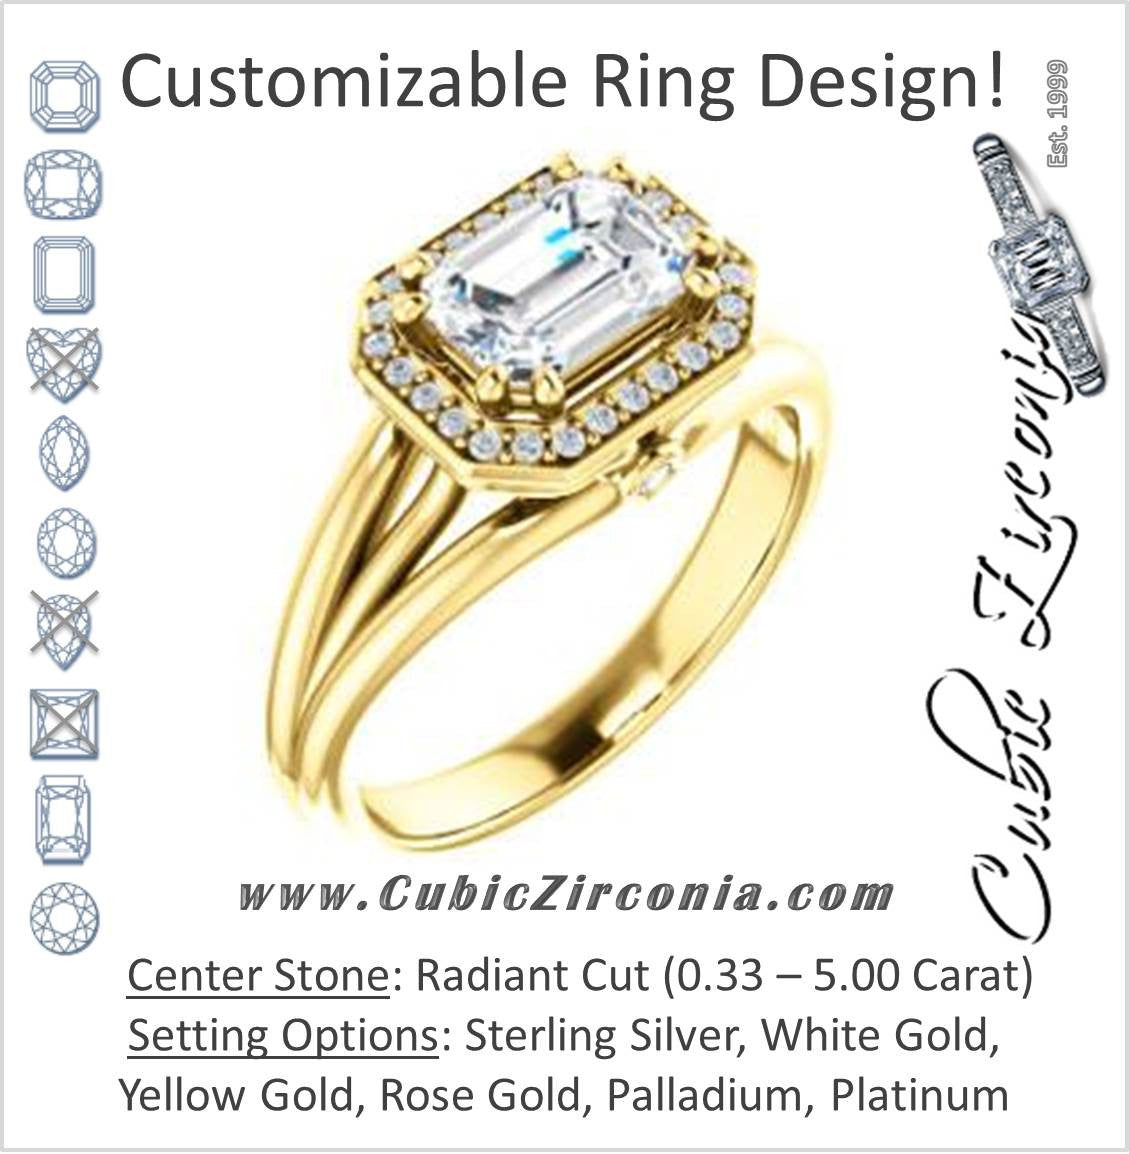 Cubic Zirconia Engagement Ring- The Wanda Lea (Customizable Radiant Cut Halo-style with Ultrawide Tri-split Band & Peekaboo Accents)